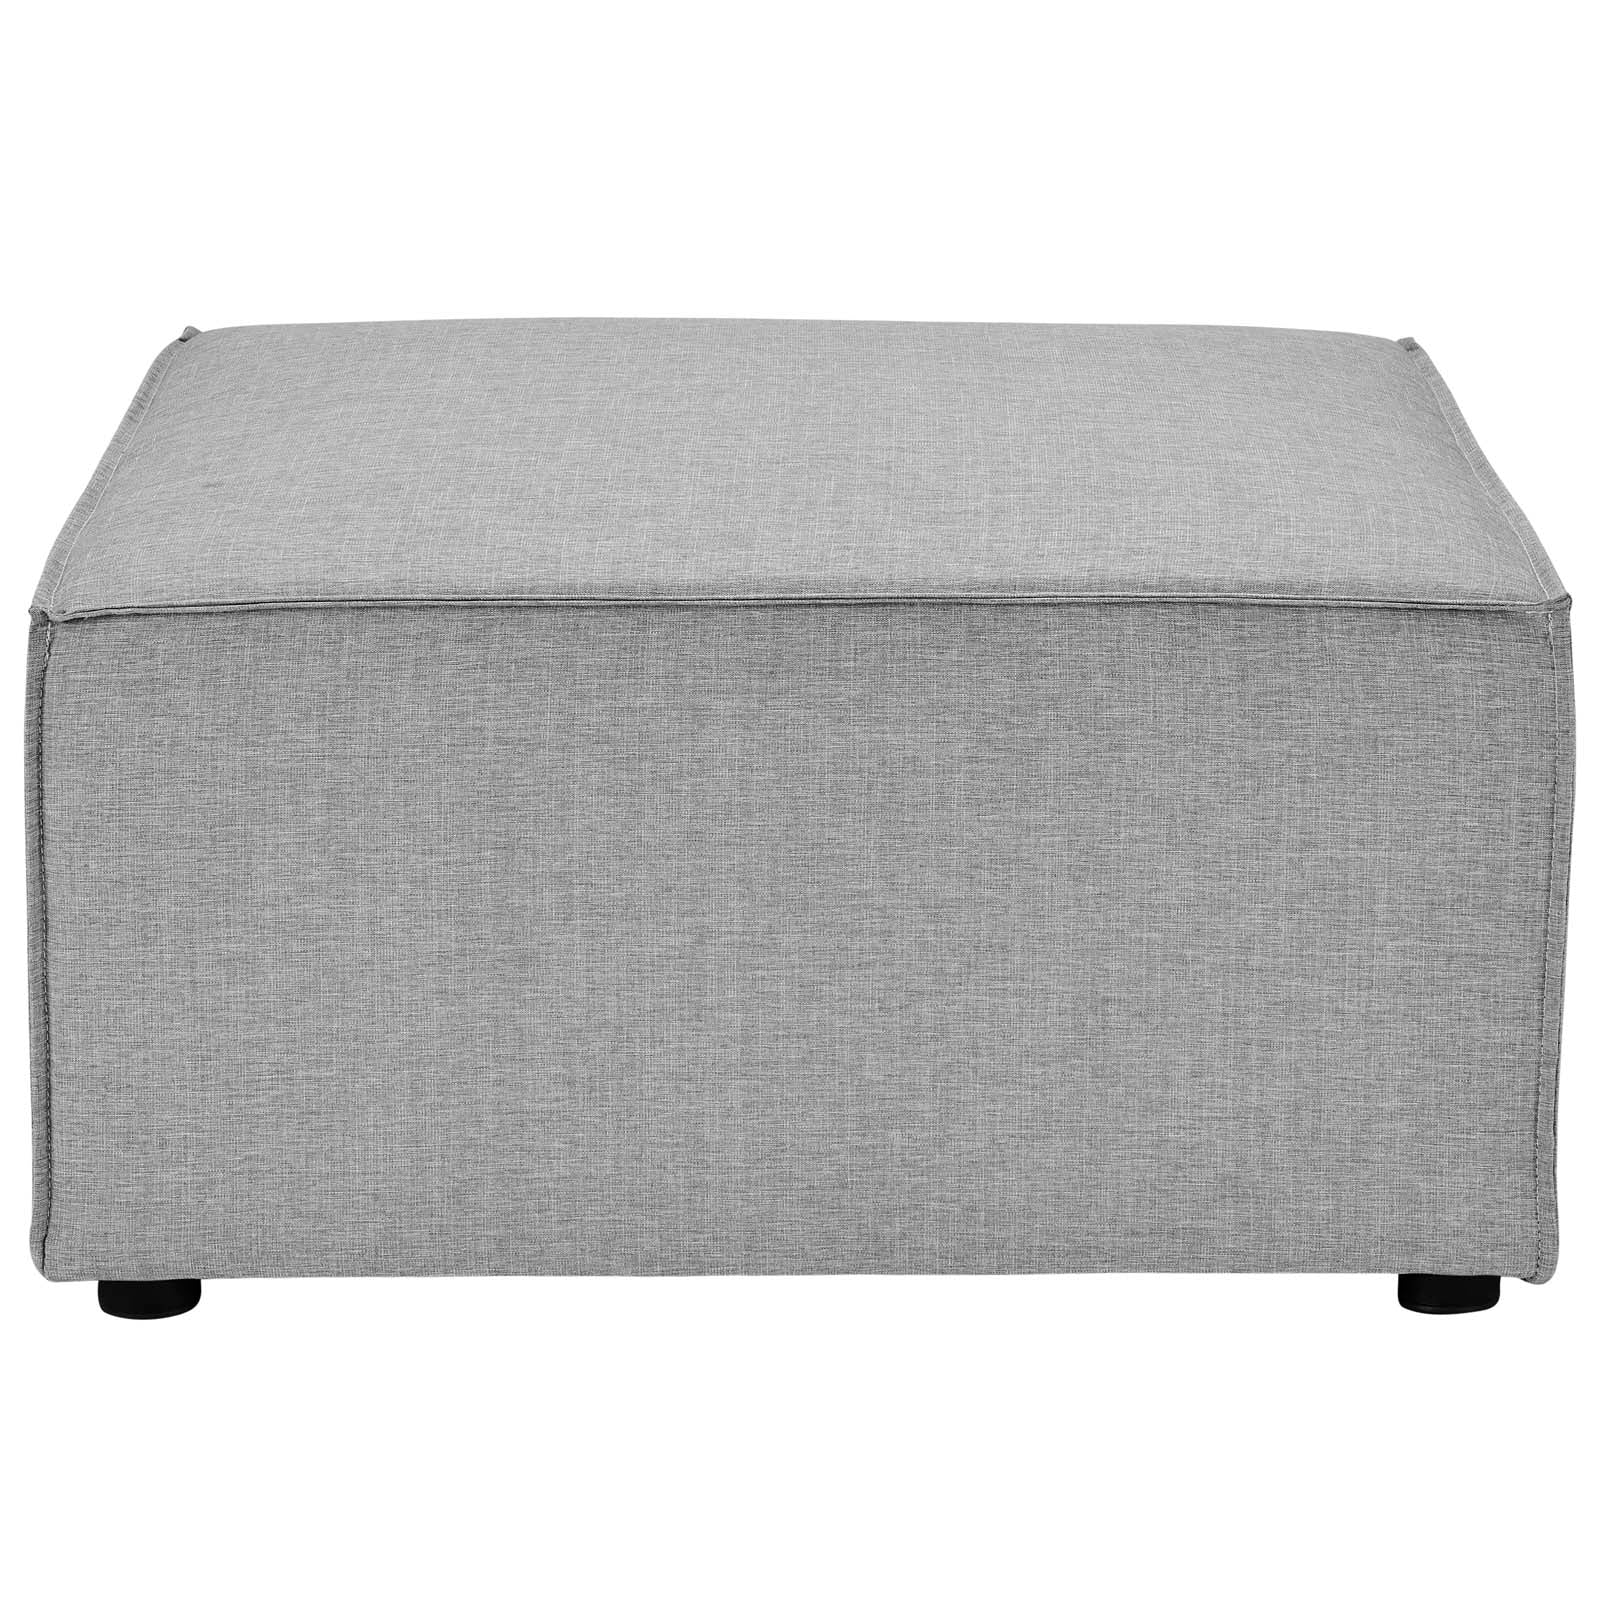 Modway Outdoor Stools & Benches - Saybrook Outdoor Patio Upholstered Sectional Sofa Ottoman Gray